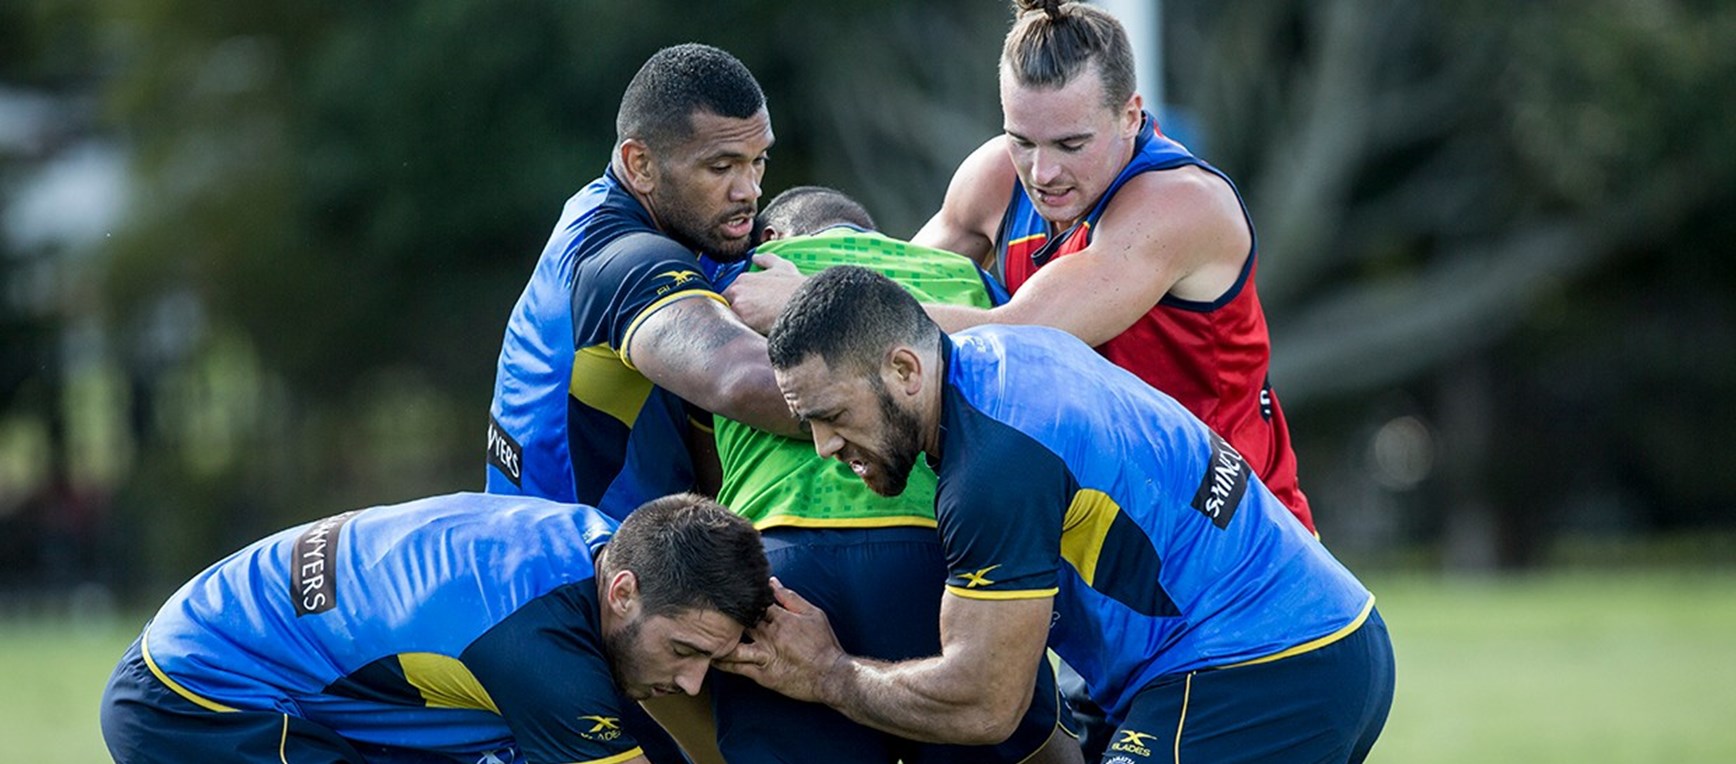 GALLERY | Nines Final Training Session